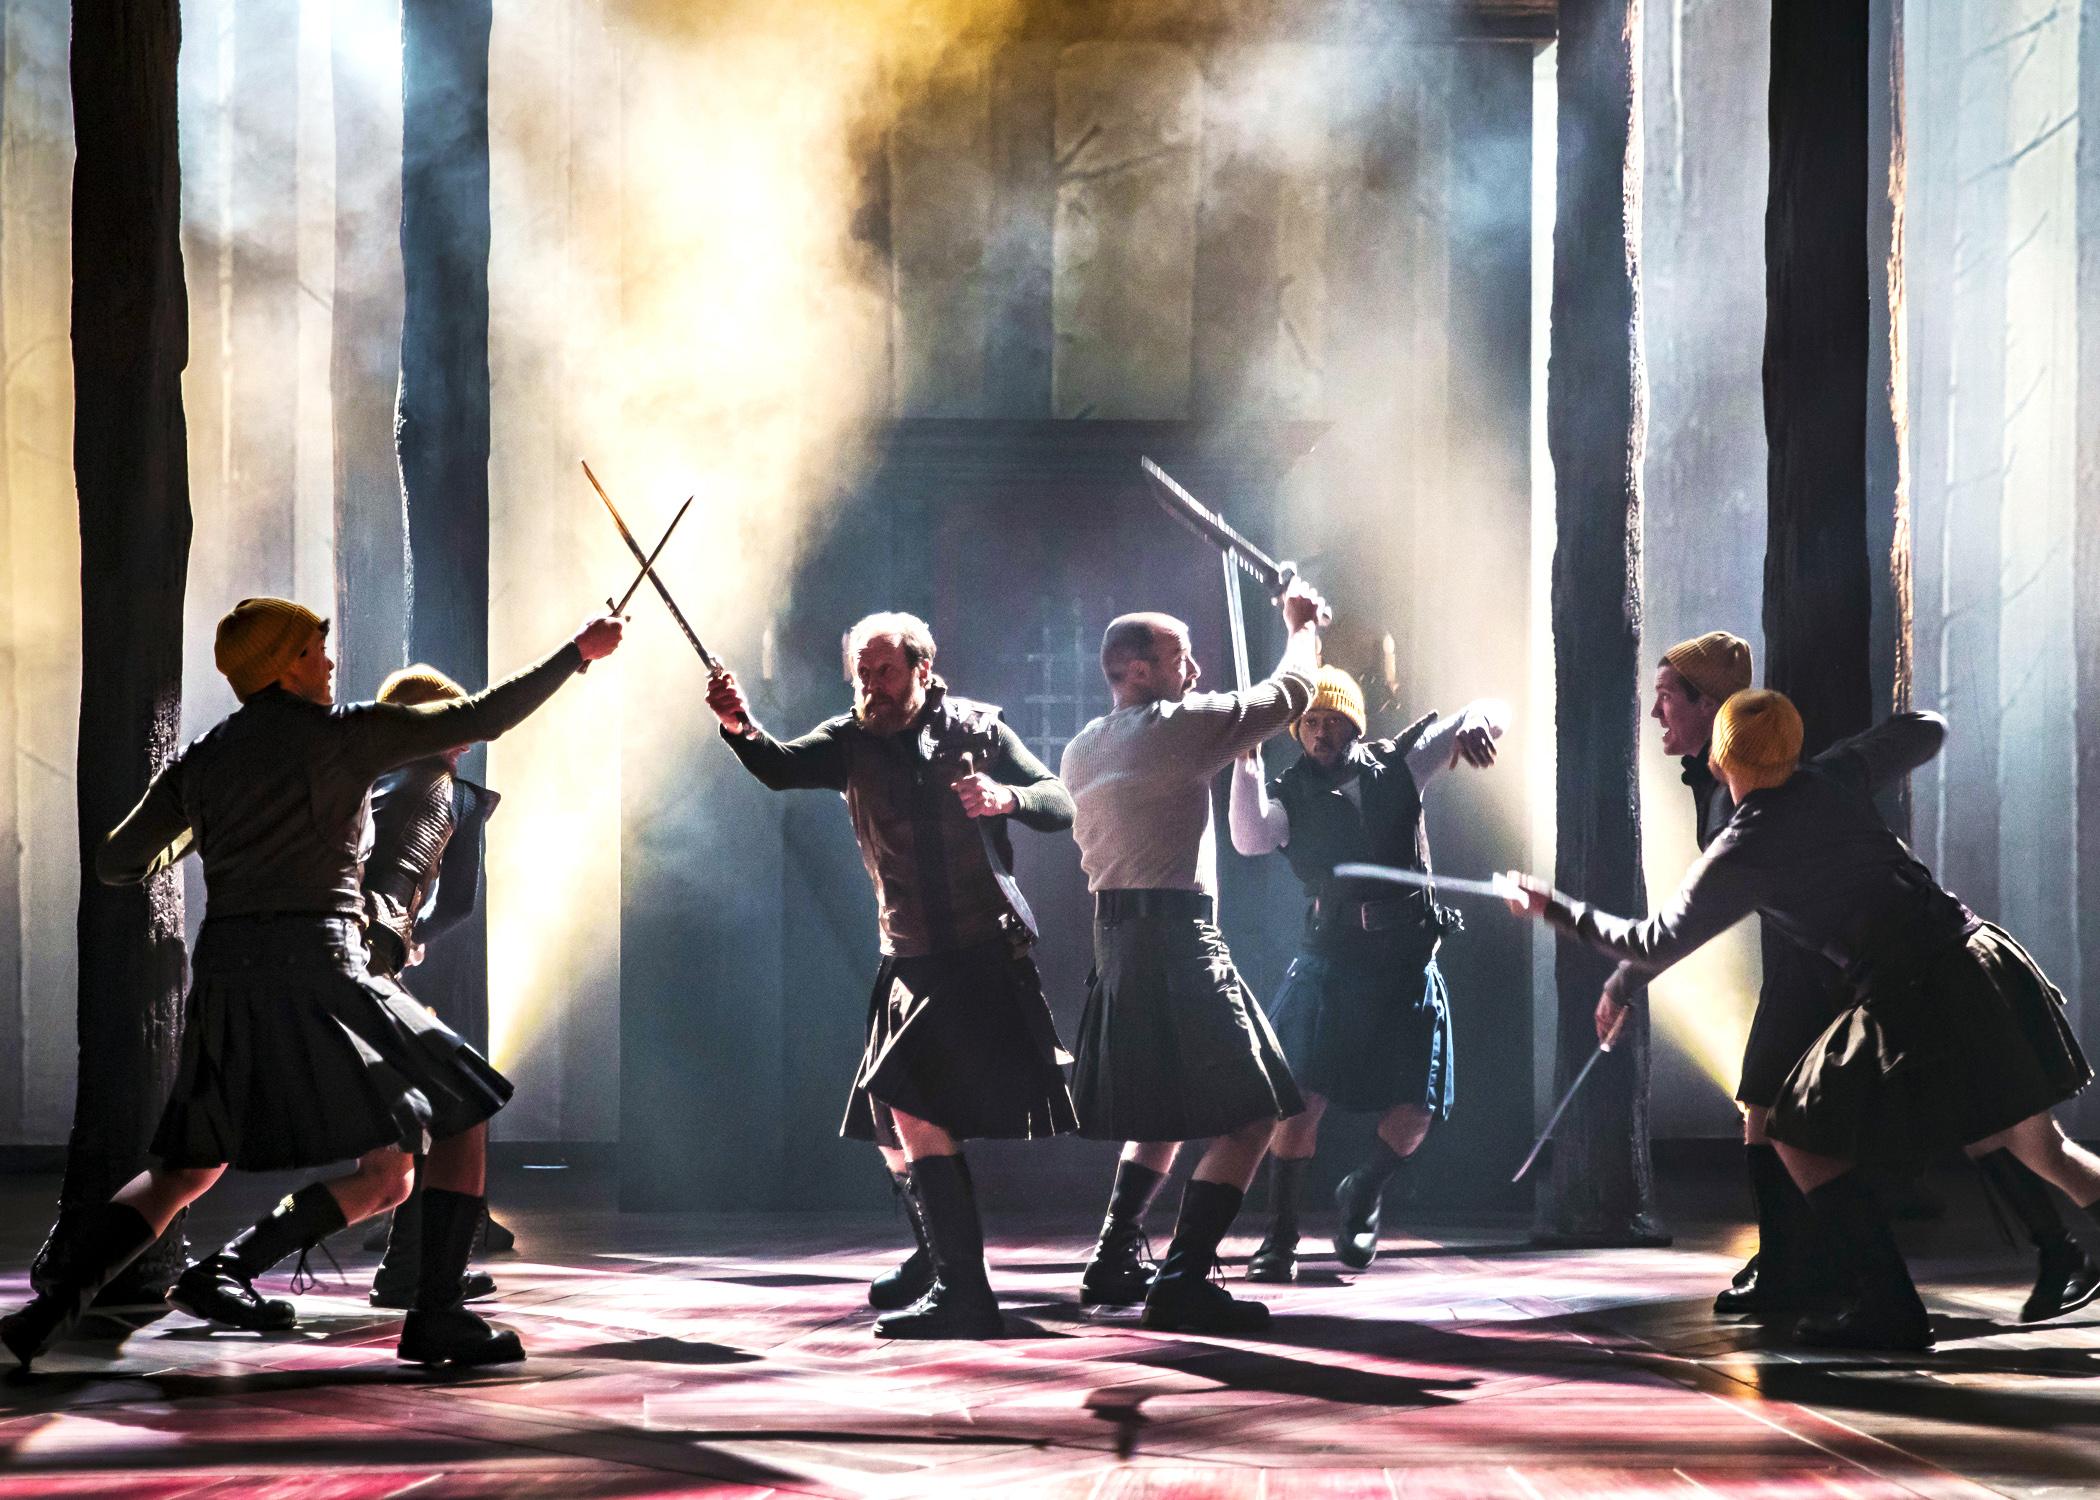 Macbeth (Ian Merrill Peakes, right center) and Banquo (Andrew White, left center) engage in the battle for Scotland in “Macbeth.” (Photo by Liz Lauren)